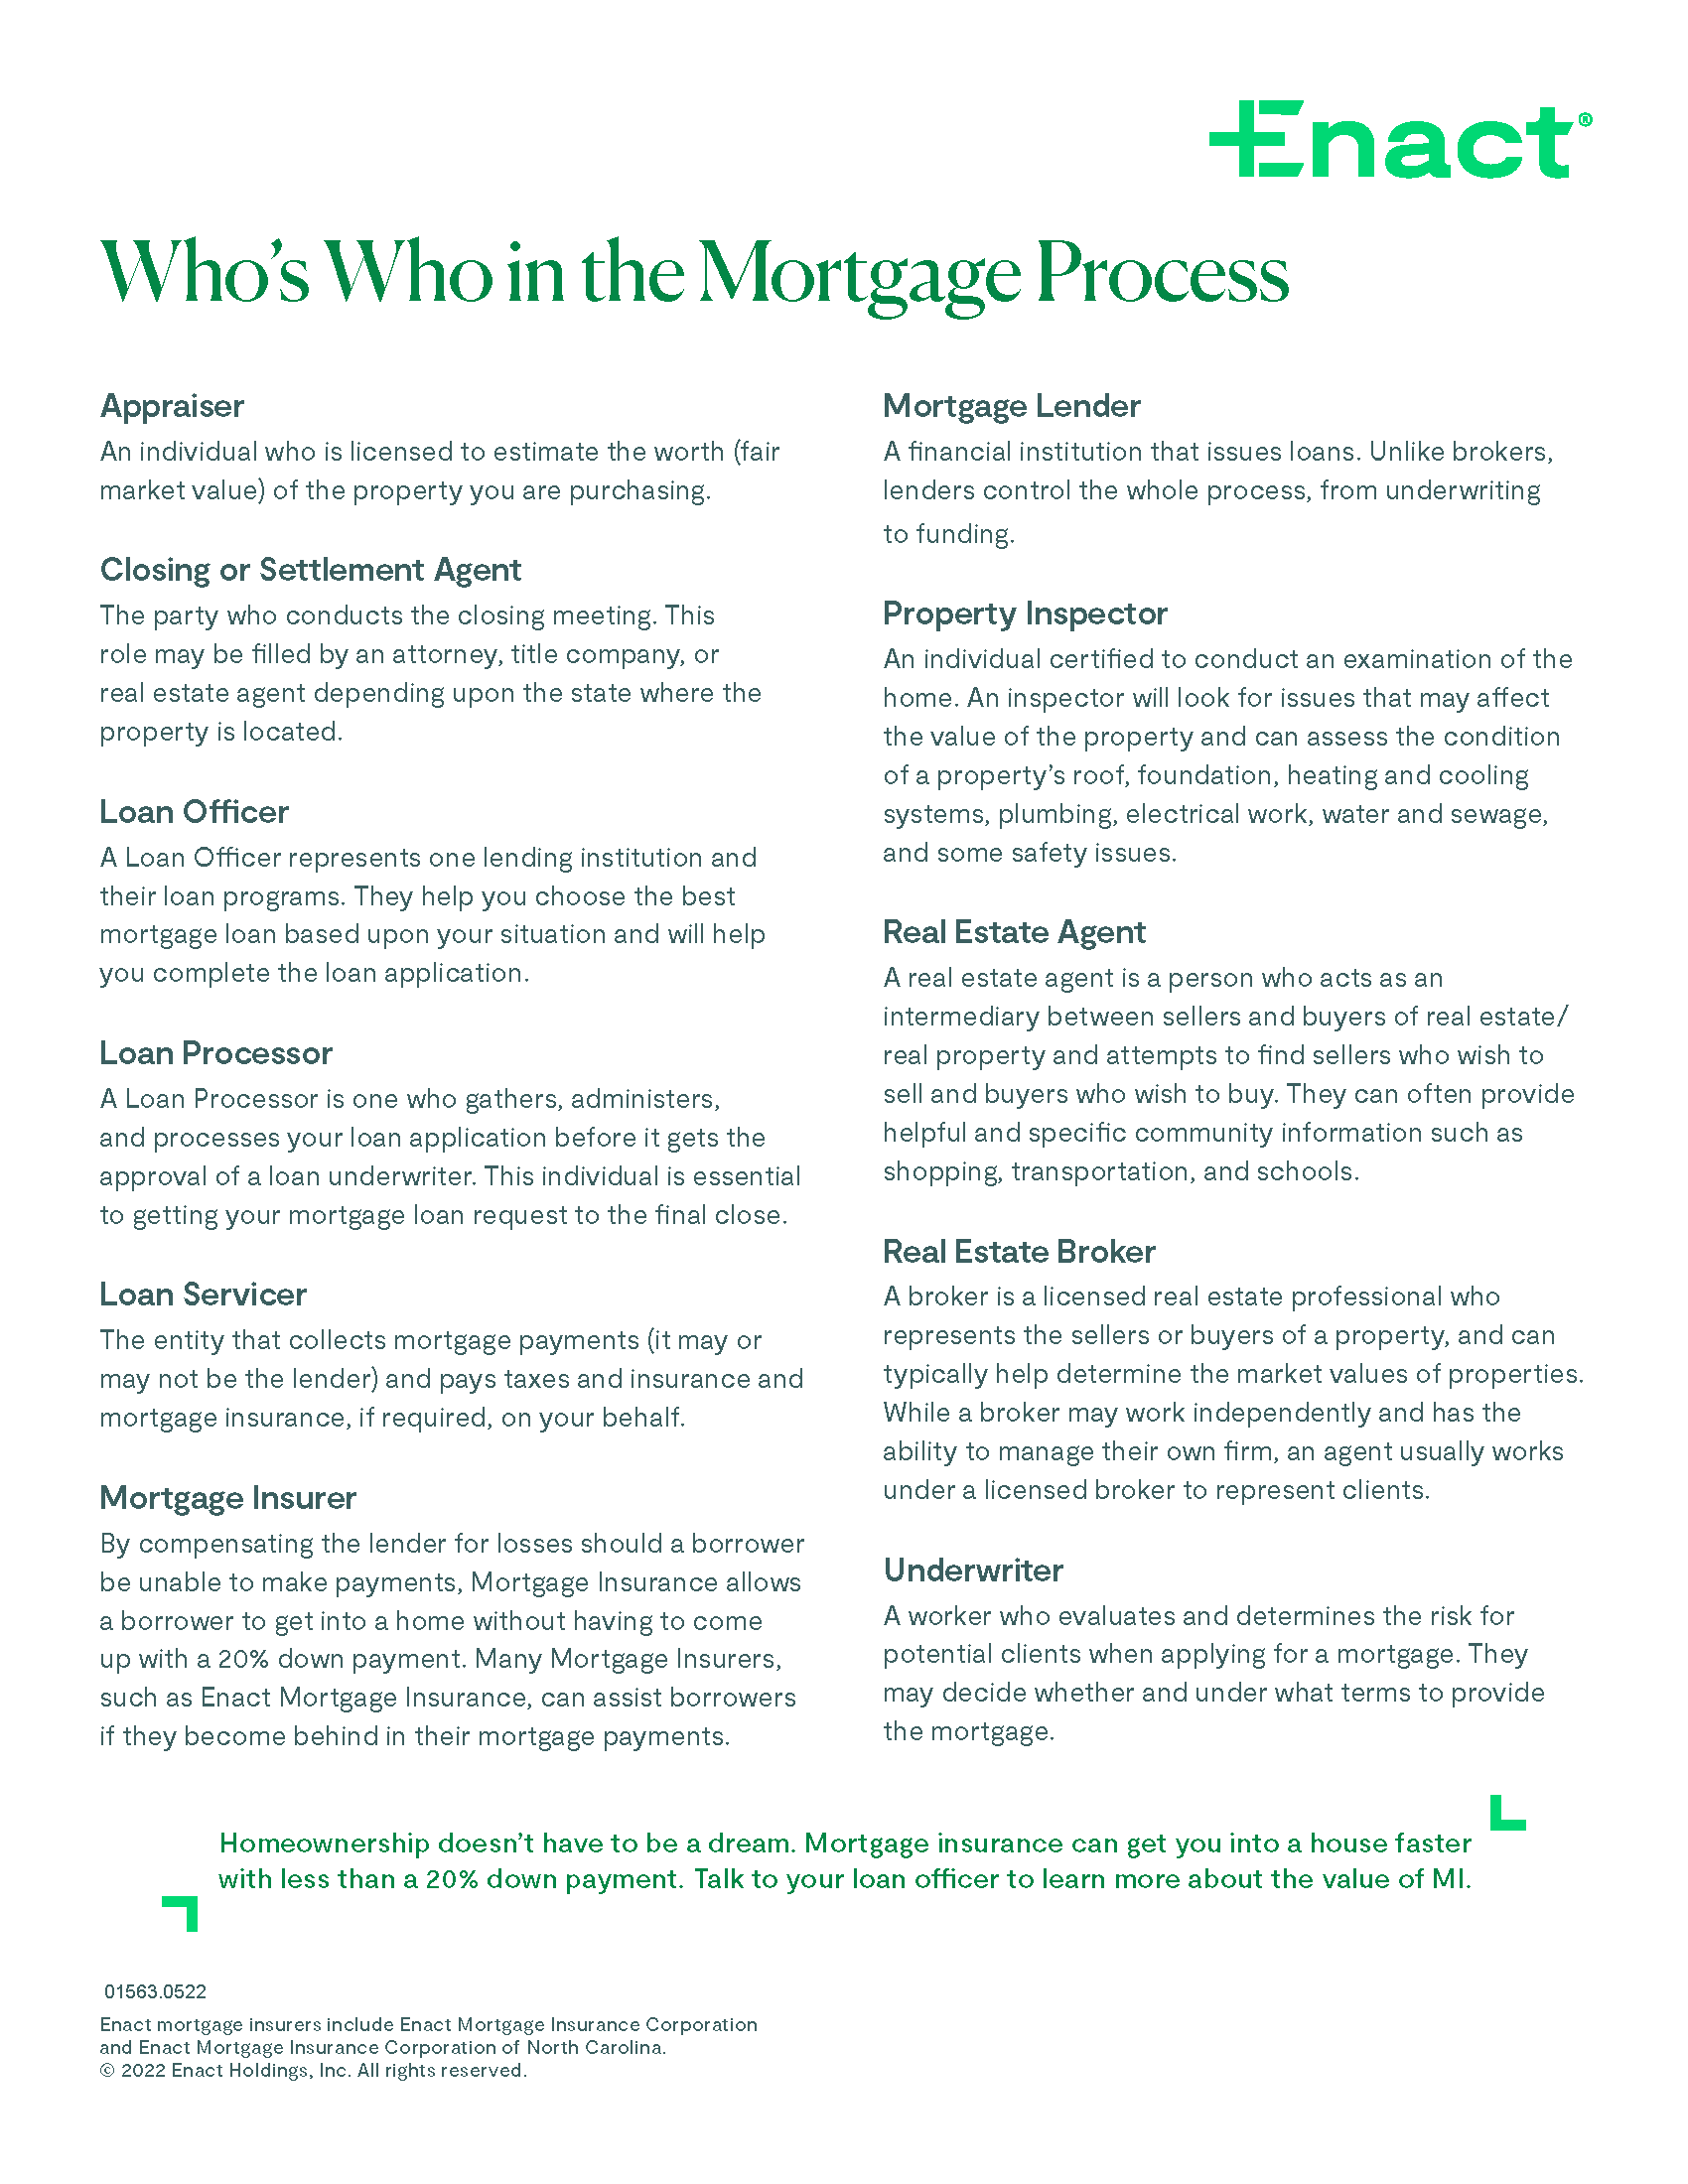 Who's Who in the Mortgage Process